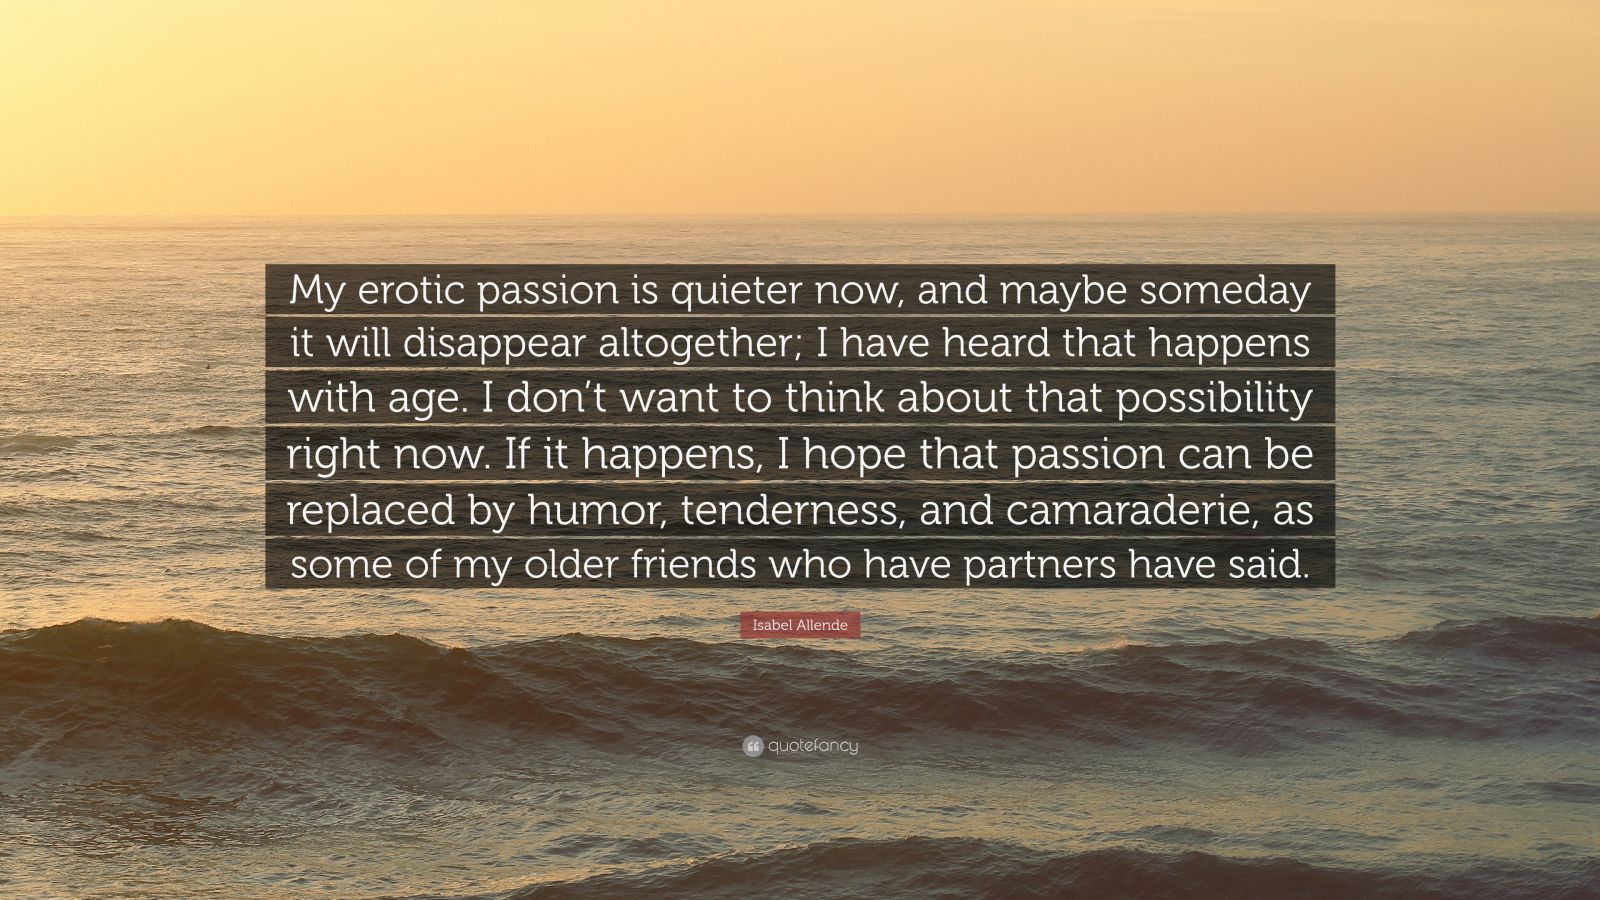 Isabel Allende Quote: “My erotic passion is quieter now, and maybe